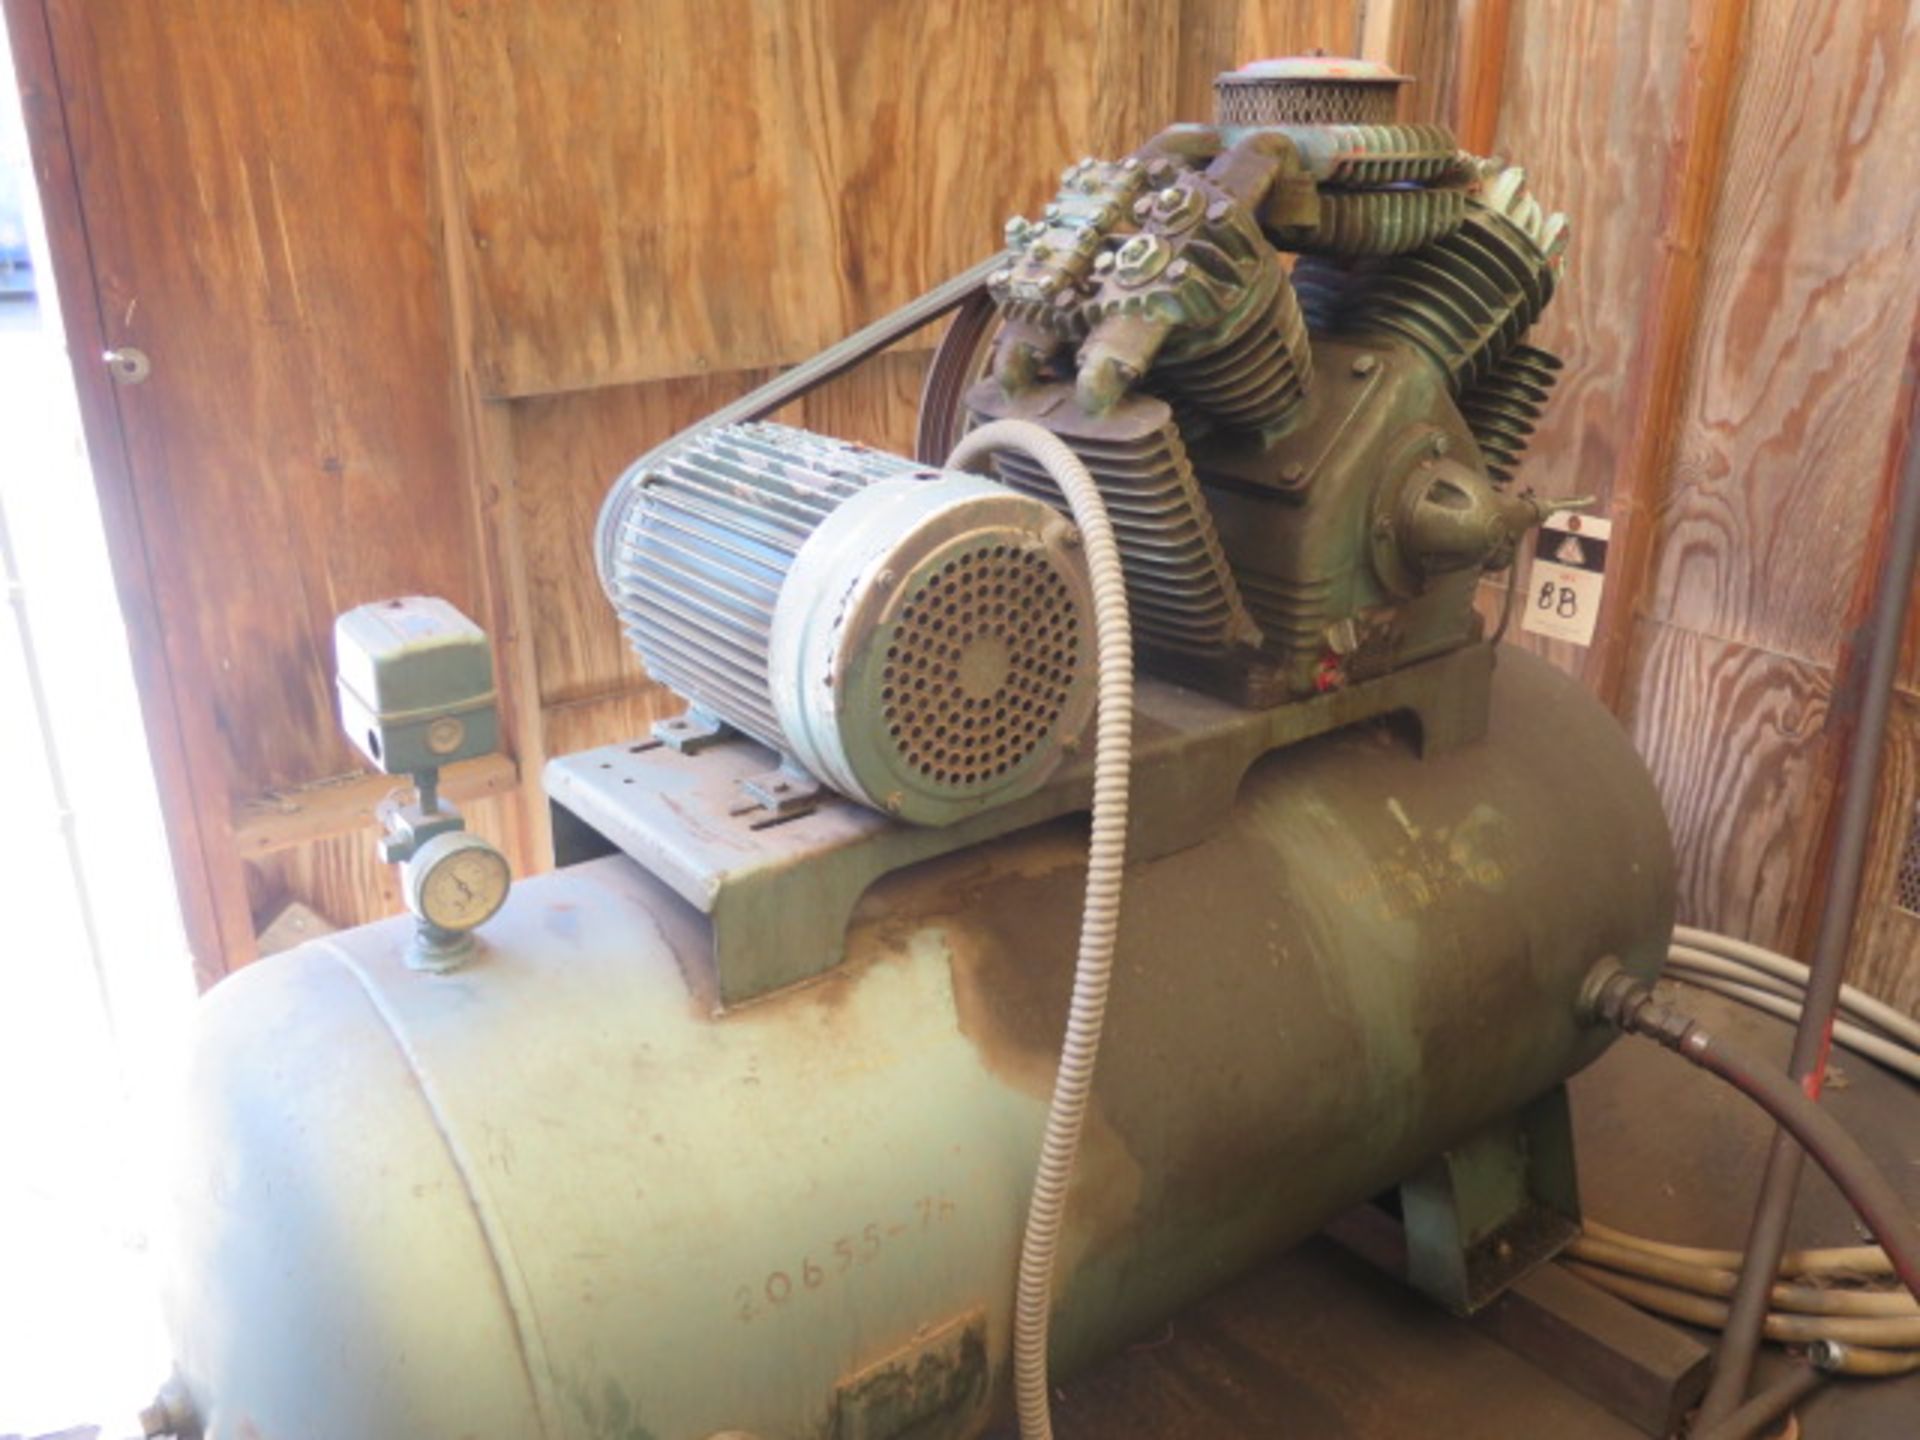 DeVilbiss 10Hp Horizontal Air Compressor w/ 2-Stage Pump, 80 Gallon Tank (SOLD AS-IS - NO WARRANTY) - Image 2 of 5